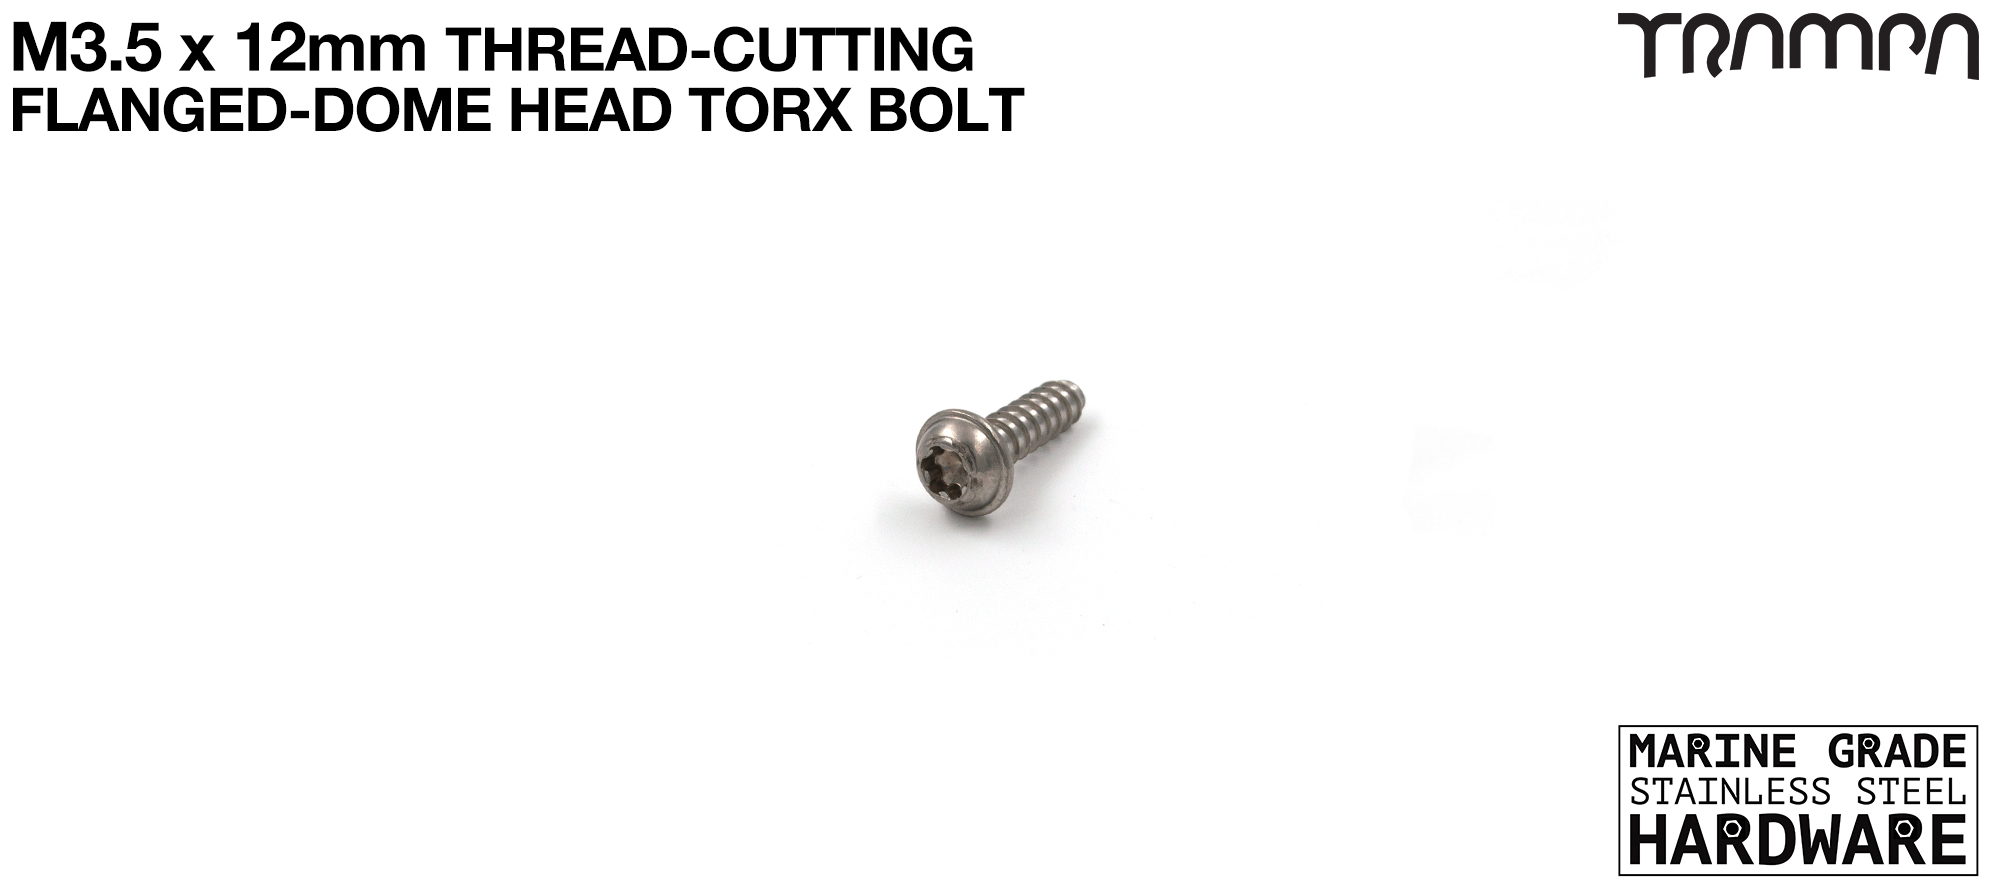 M3.5 x 12 EJOT Bolt. TORX PAN Headed Used to secure the Motor PROTECTION COVERS fitting to SPUR GEAR DRIVE Motor Mounts, this bolt cuts its own thread!!!